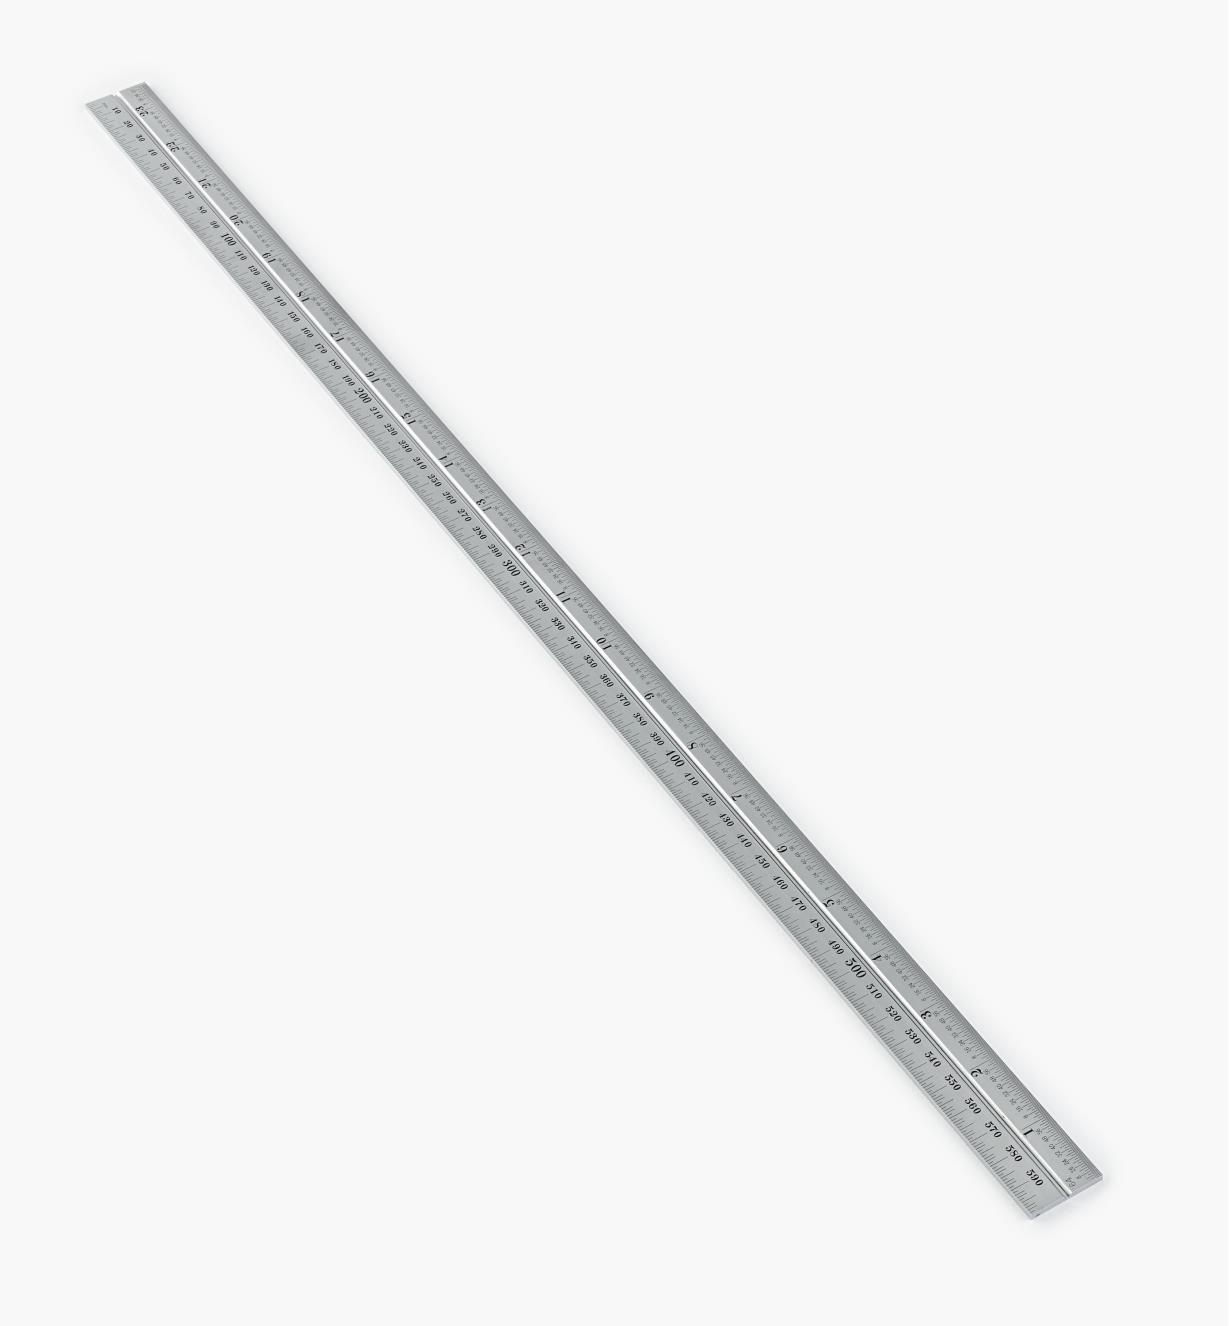 30N3152 - Starrett 23 1/2"/600mm Imperial/Metric Chrome Rule for 12"/300mm Square, Protractor & Center-Finding Heads